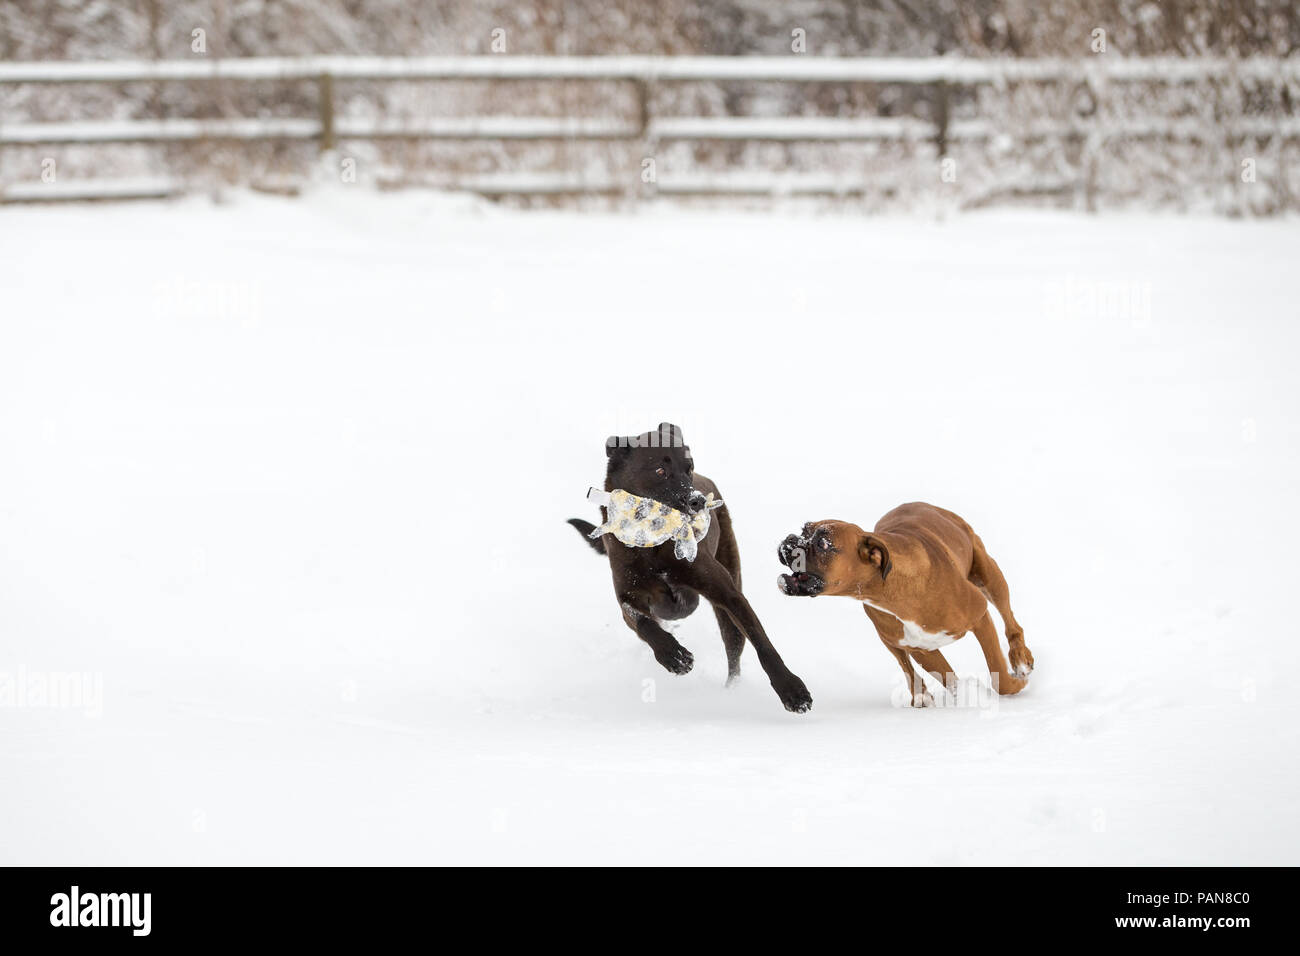 boxer dog reaching for toy in shepherd dog's mouth while running in the snow Stock Photo